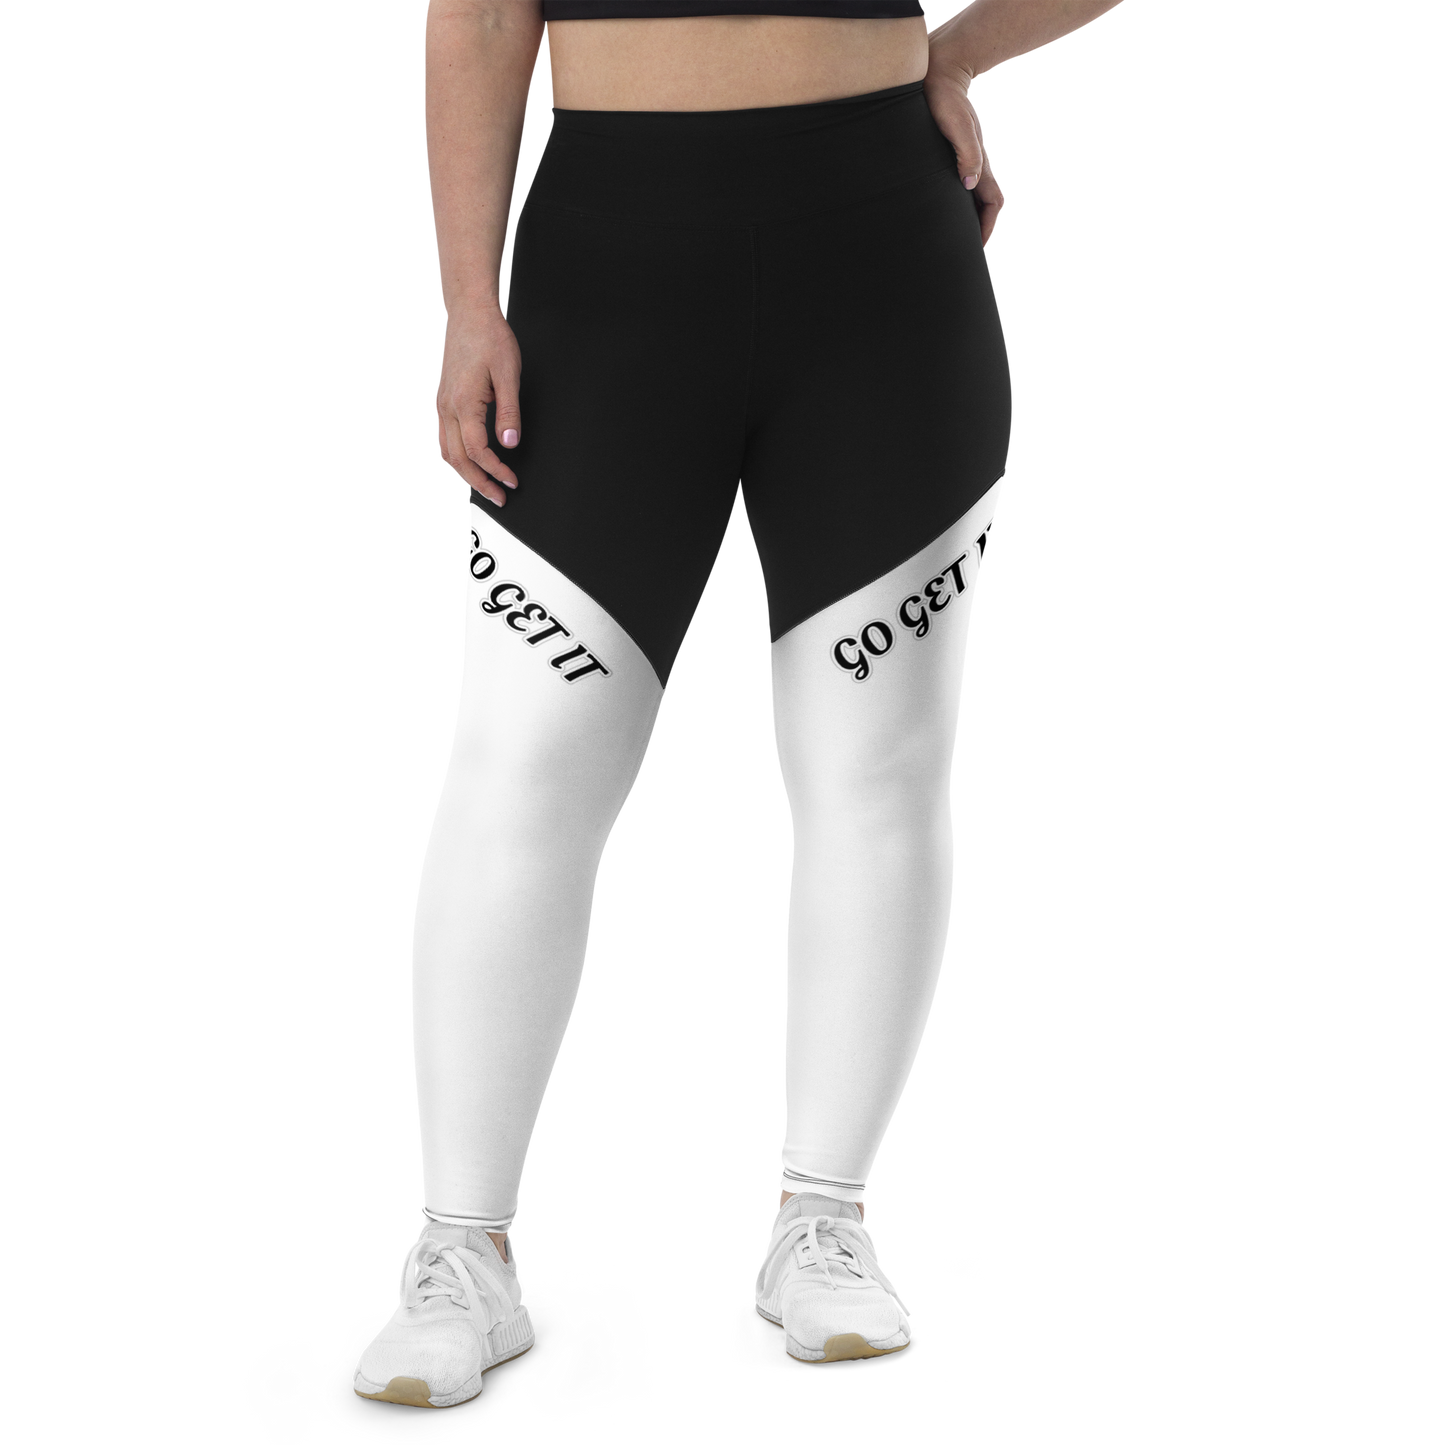 Level Up Your Workout: High-Waisted Compression Leggings with Perfect Fit & Phone Pocket